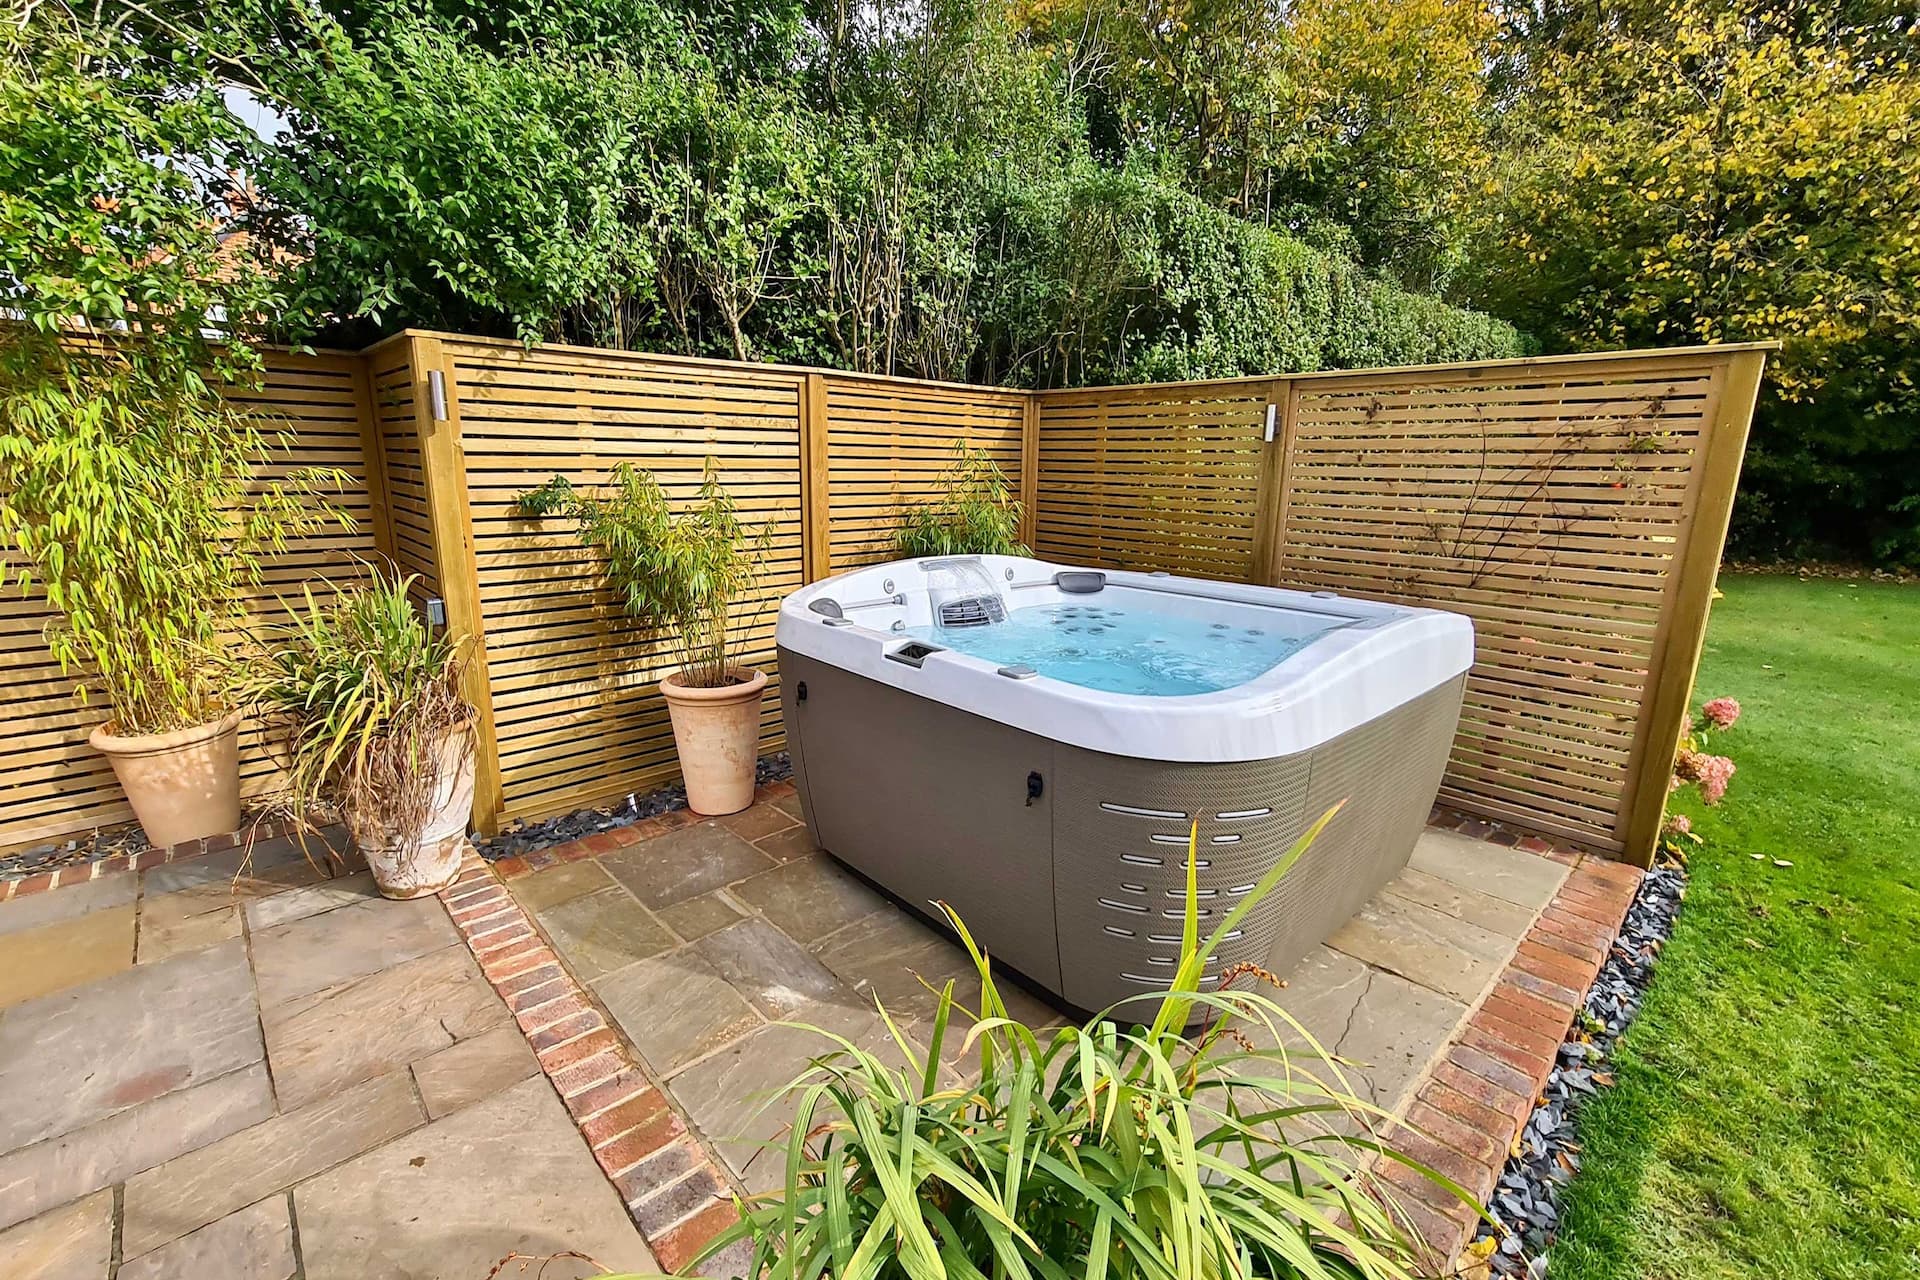 Why You Should Go For A Hot Tub?